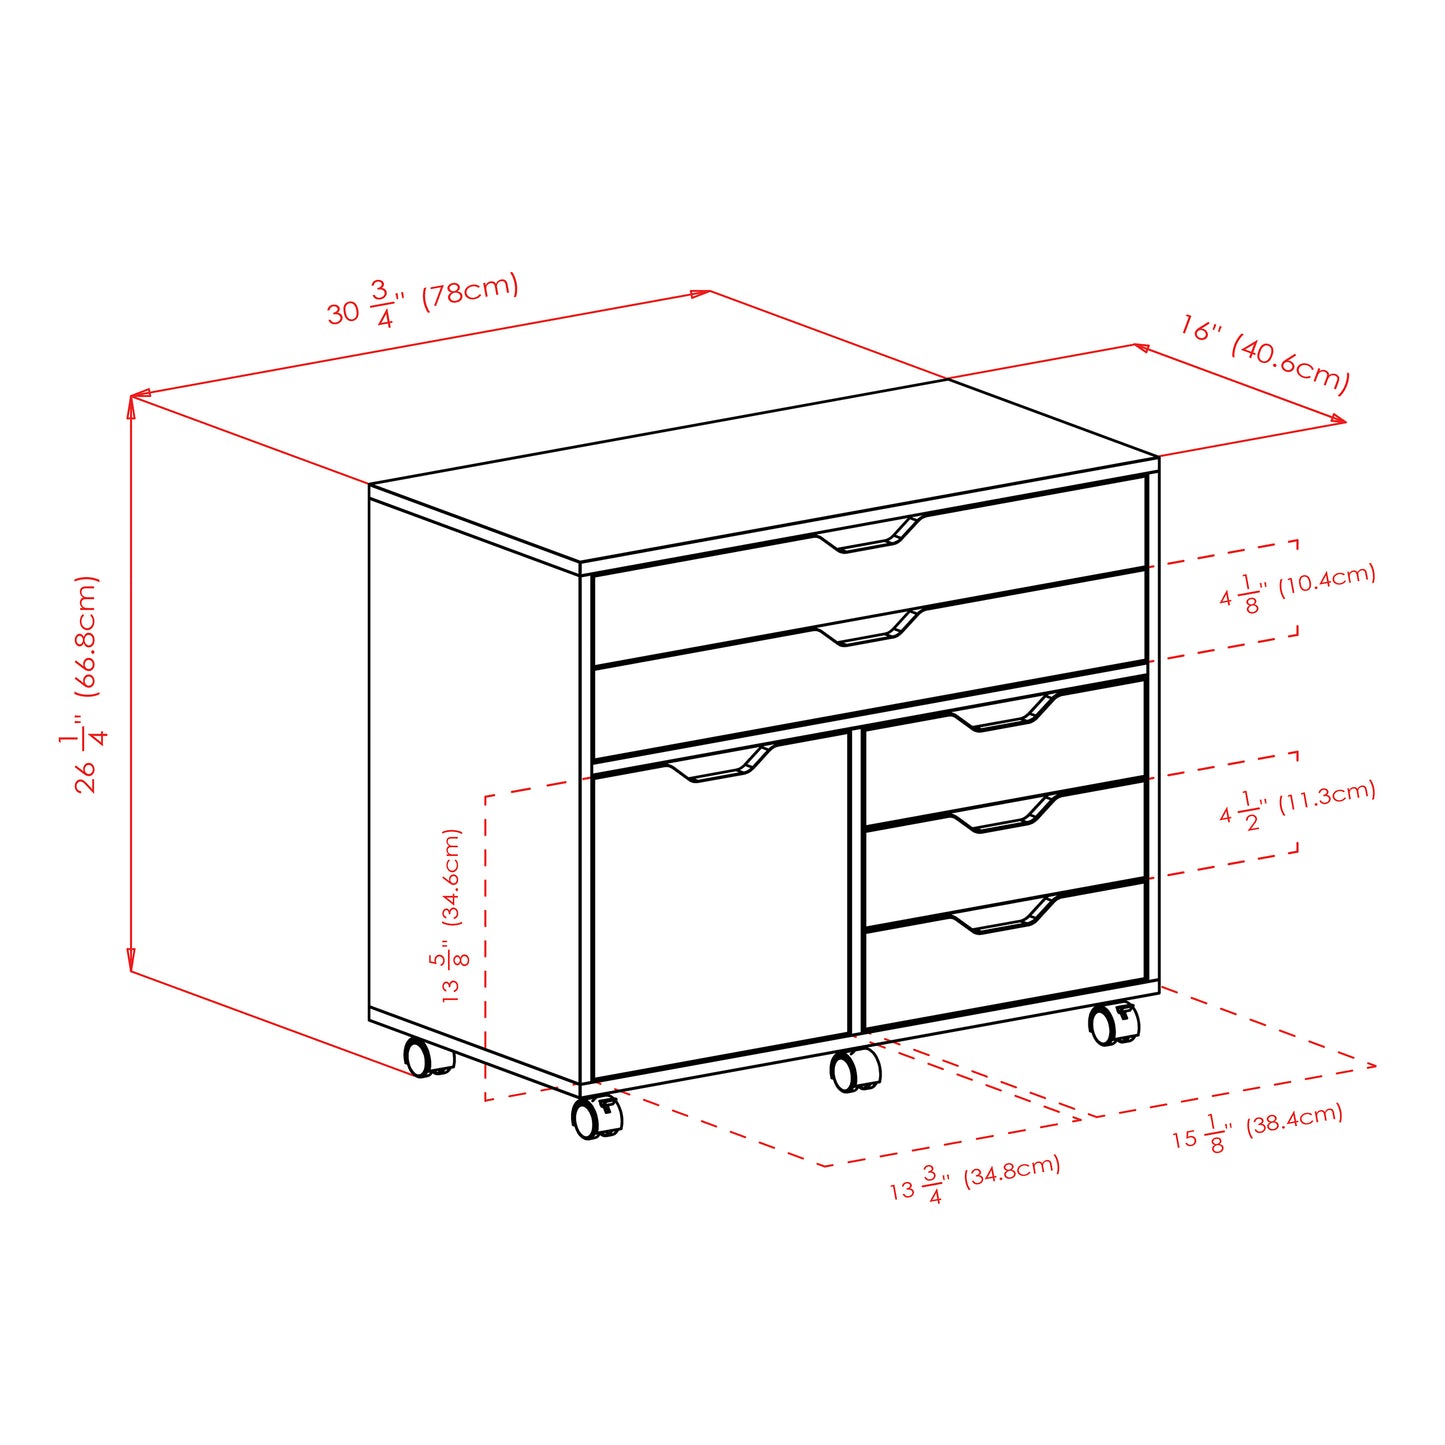 Halifax Wide Storage Cabinet, 3-Small and 2-Wide Drawers, White